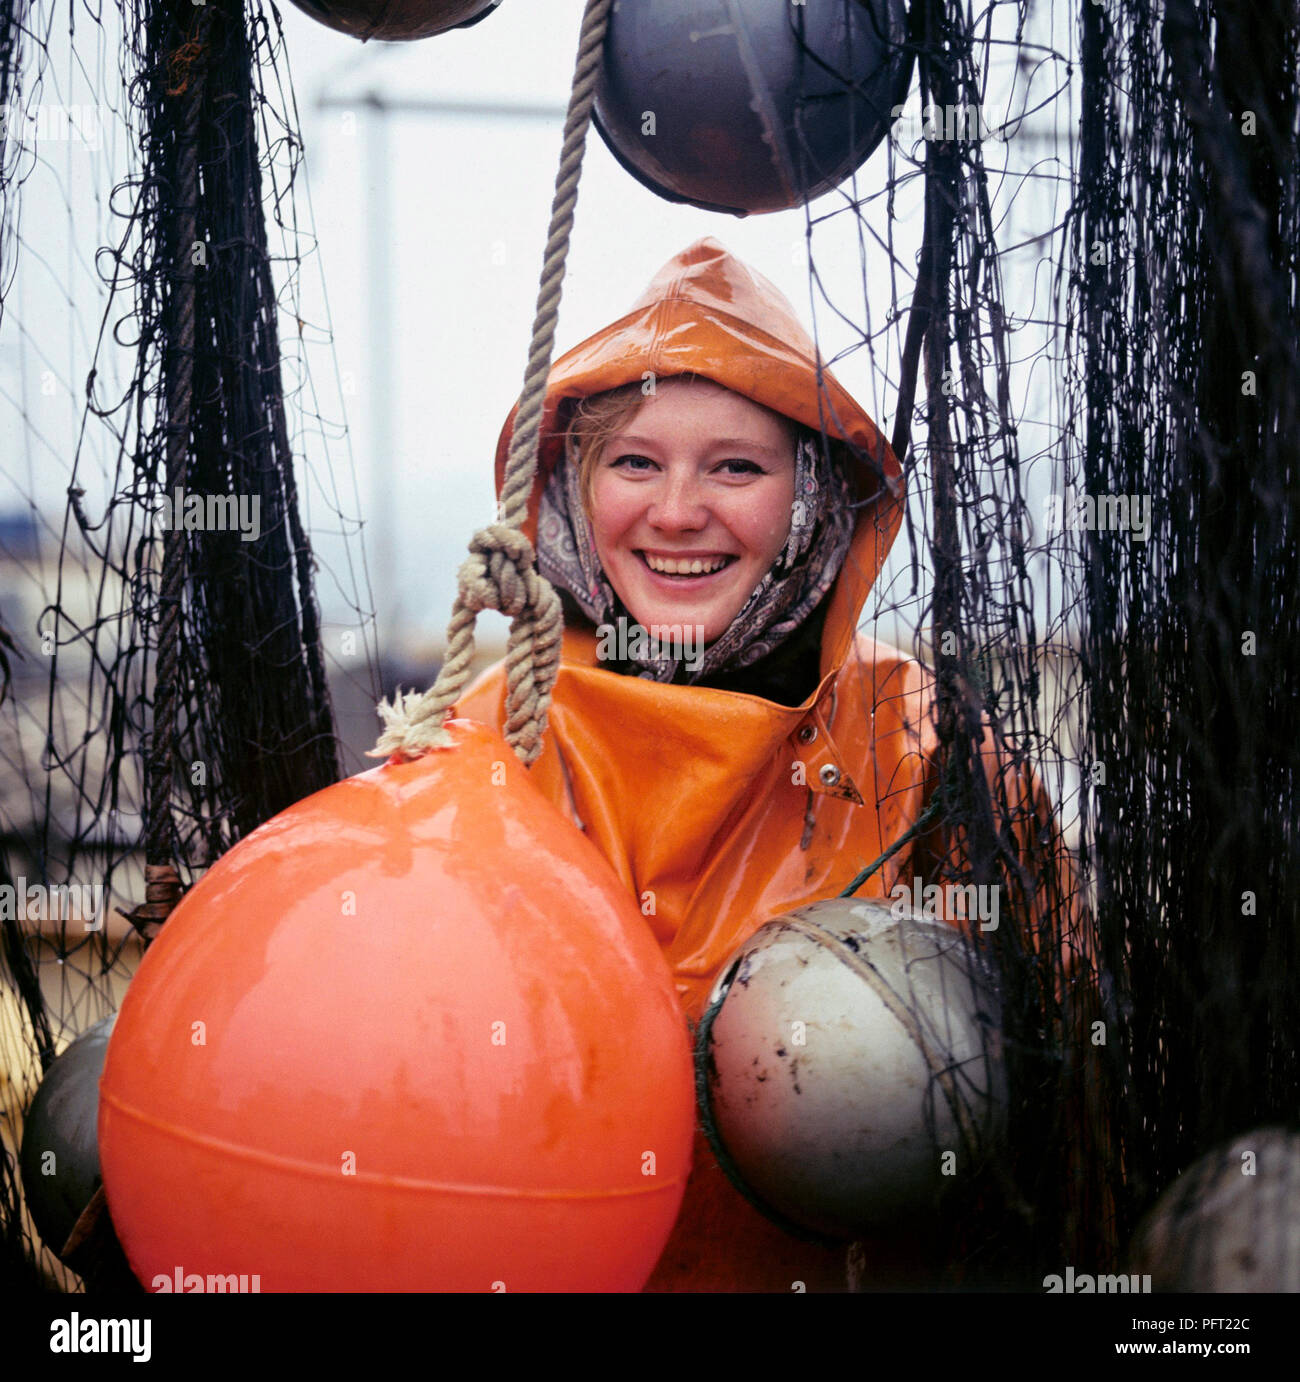 Rain in the 1960s. A young smiling woman is dressed in rain clothes and  poses on a the deck of a fishing vessel with fishing nets. Sweden 1969  Stock Photo - Alamy